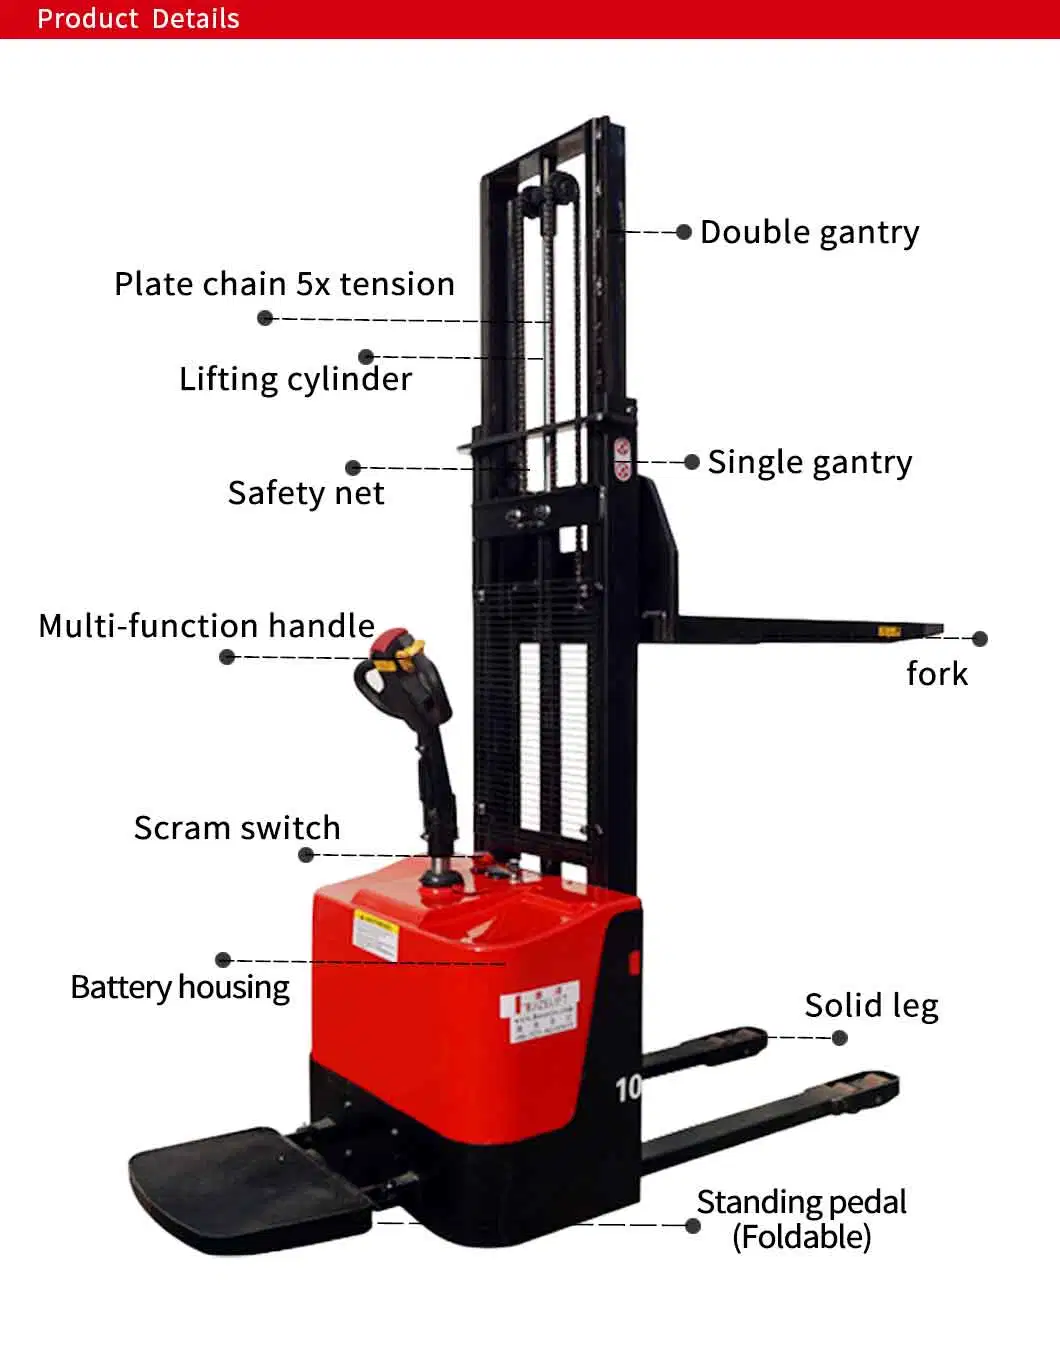 0.5-2t Fully Automated Forklift Walkie Lift Electric Stacker with 1.6m-4m Reach